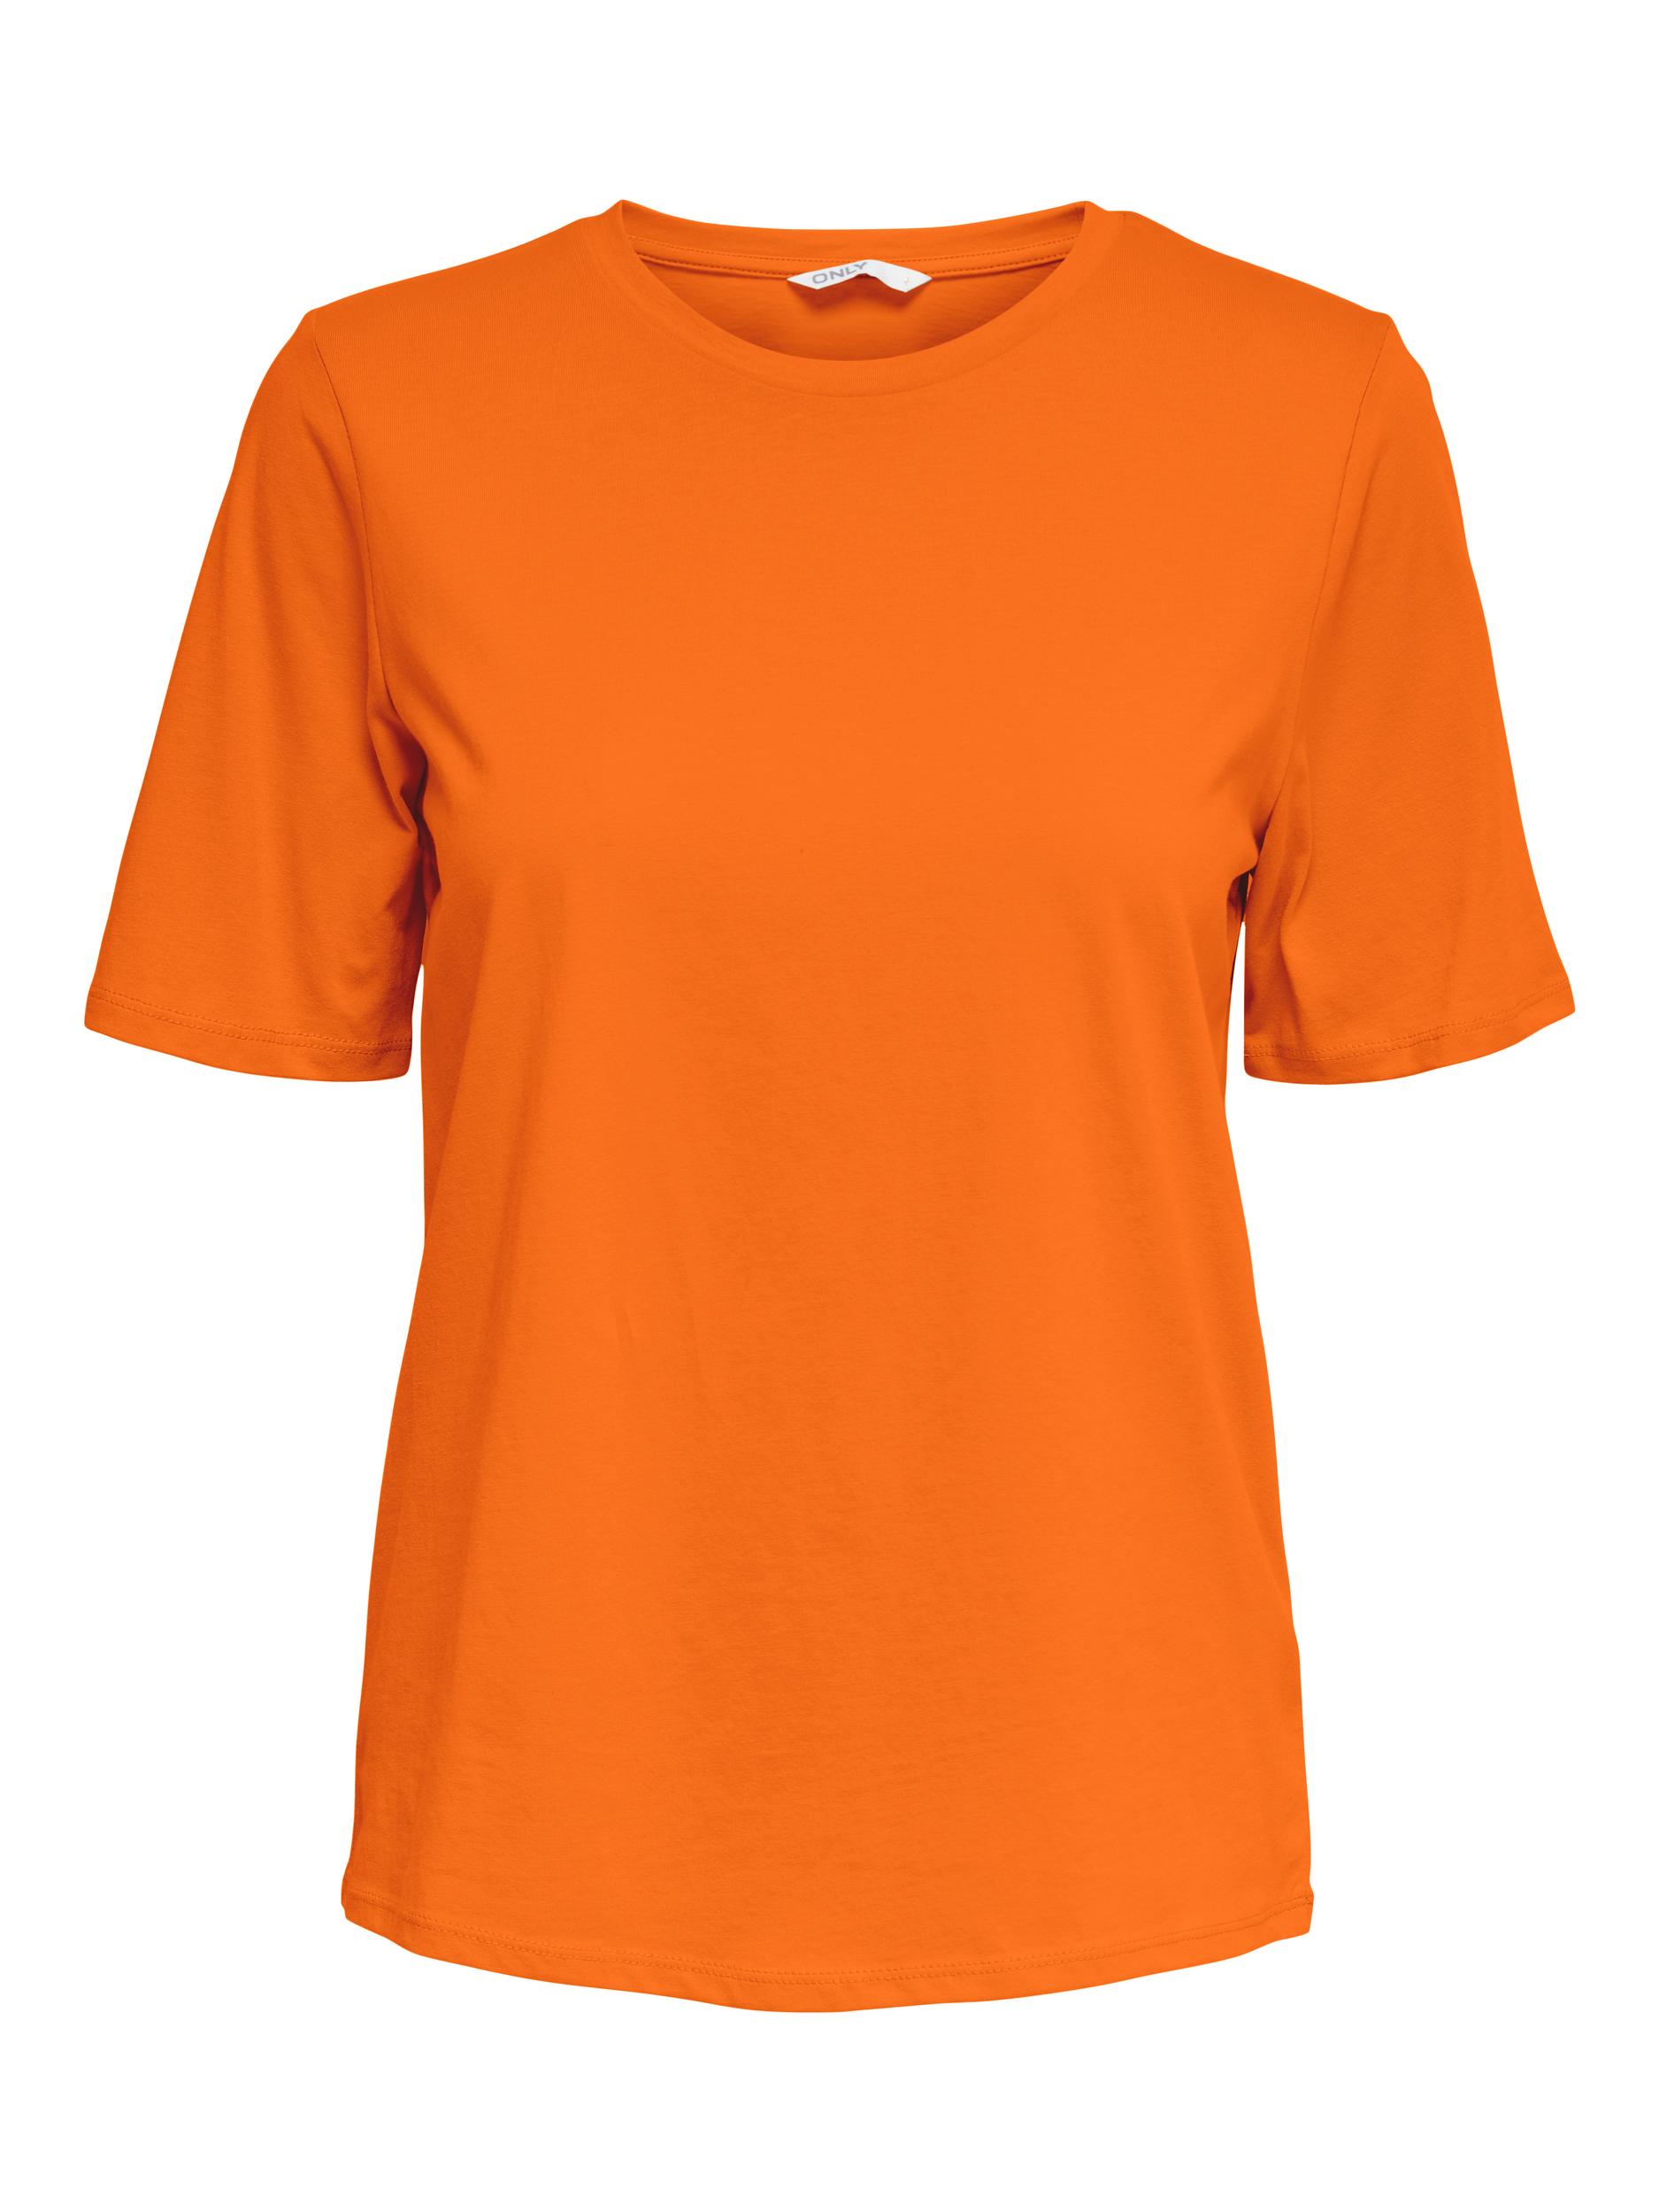  New Only T-shirt, Oriole, M